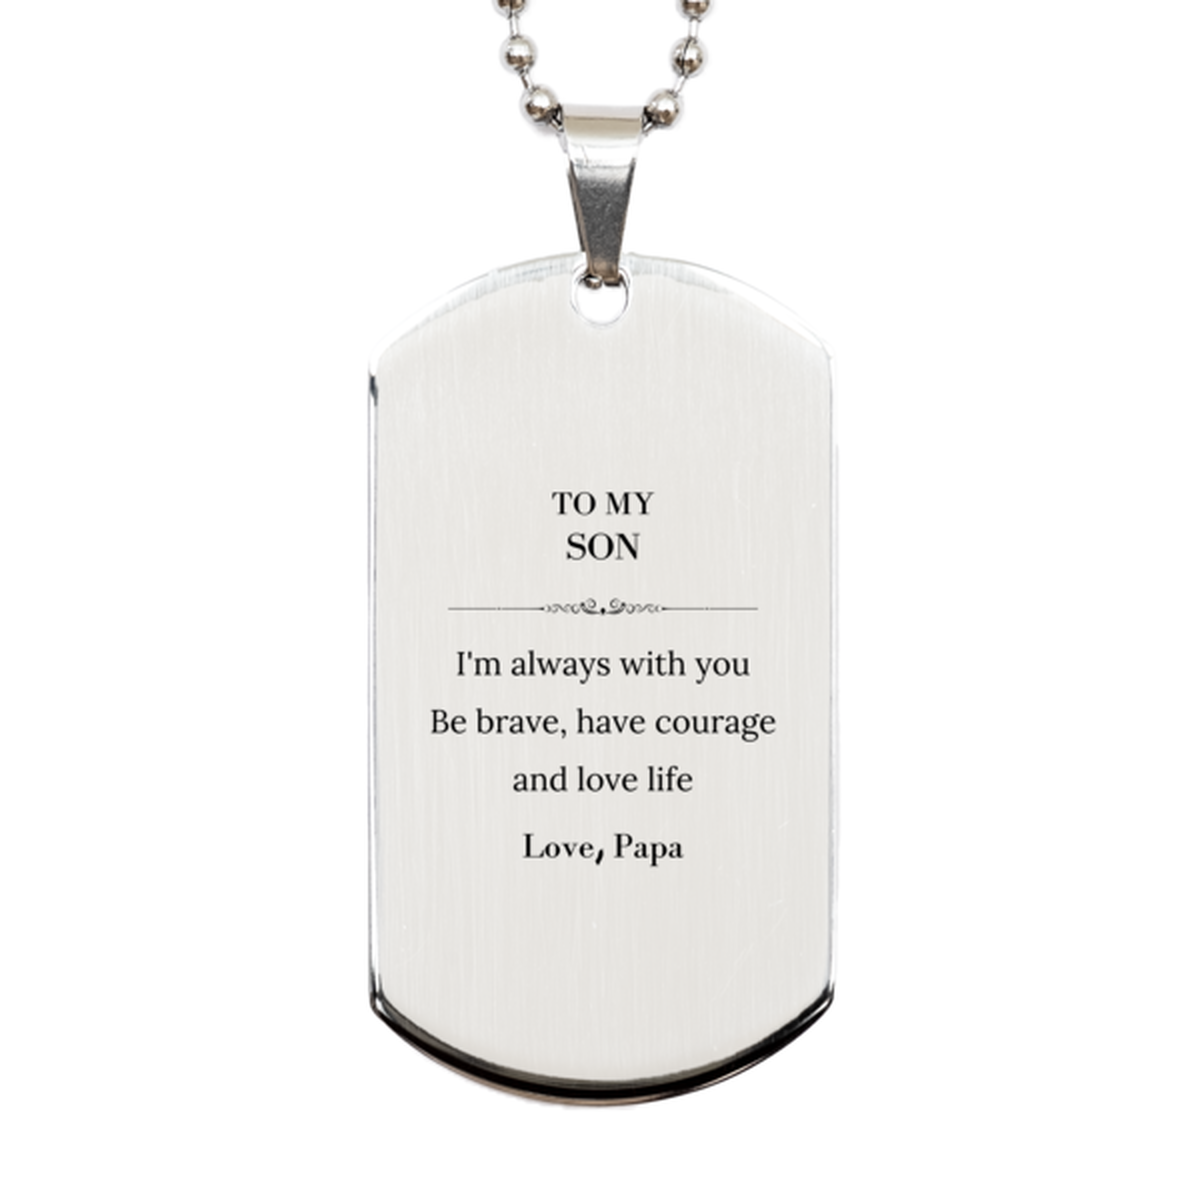 To My Son Gifts from Papa, Unique Silver Dog Tag Inspirational Christmas Birthday Graduation Gifts for Son I'm always with you. Be brave, have courage and love life. Love, Papa